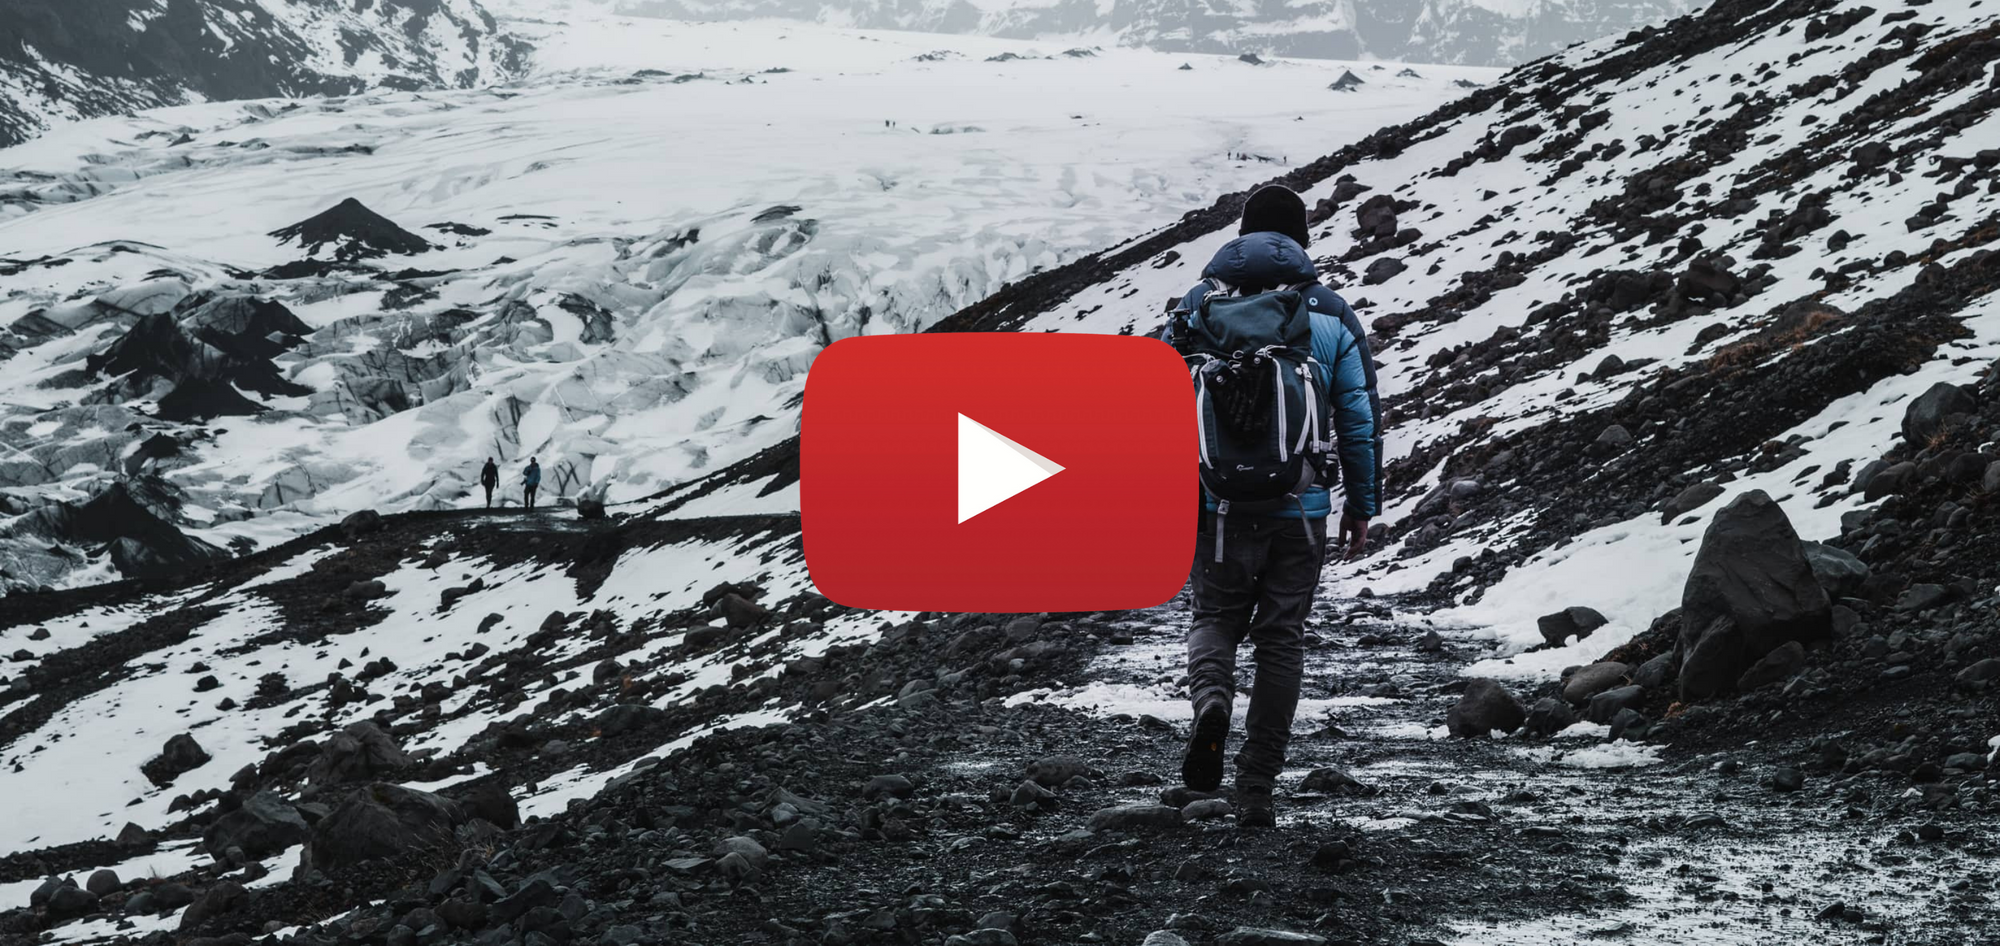 10 Photography YouTube channels we are obsessed with right now